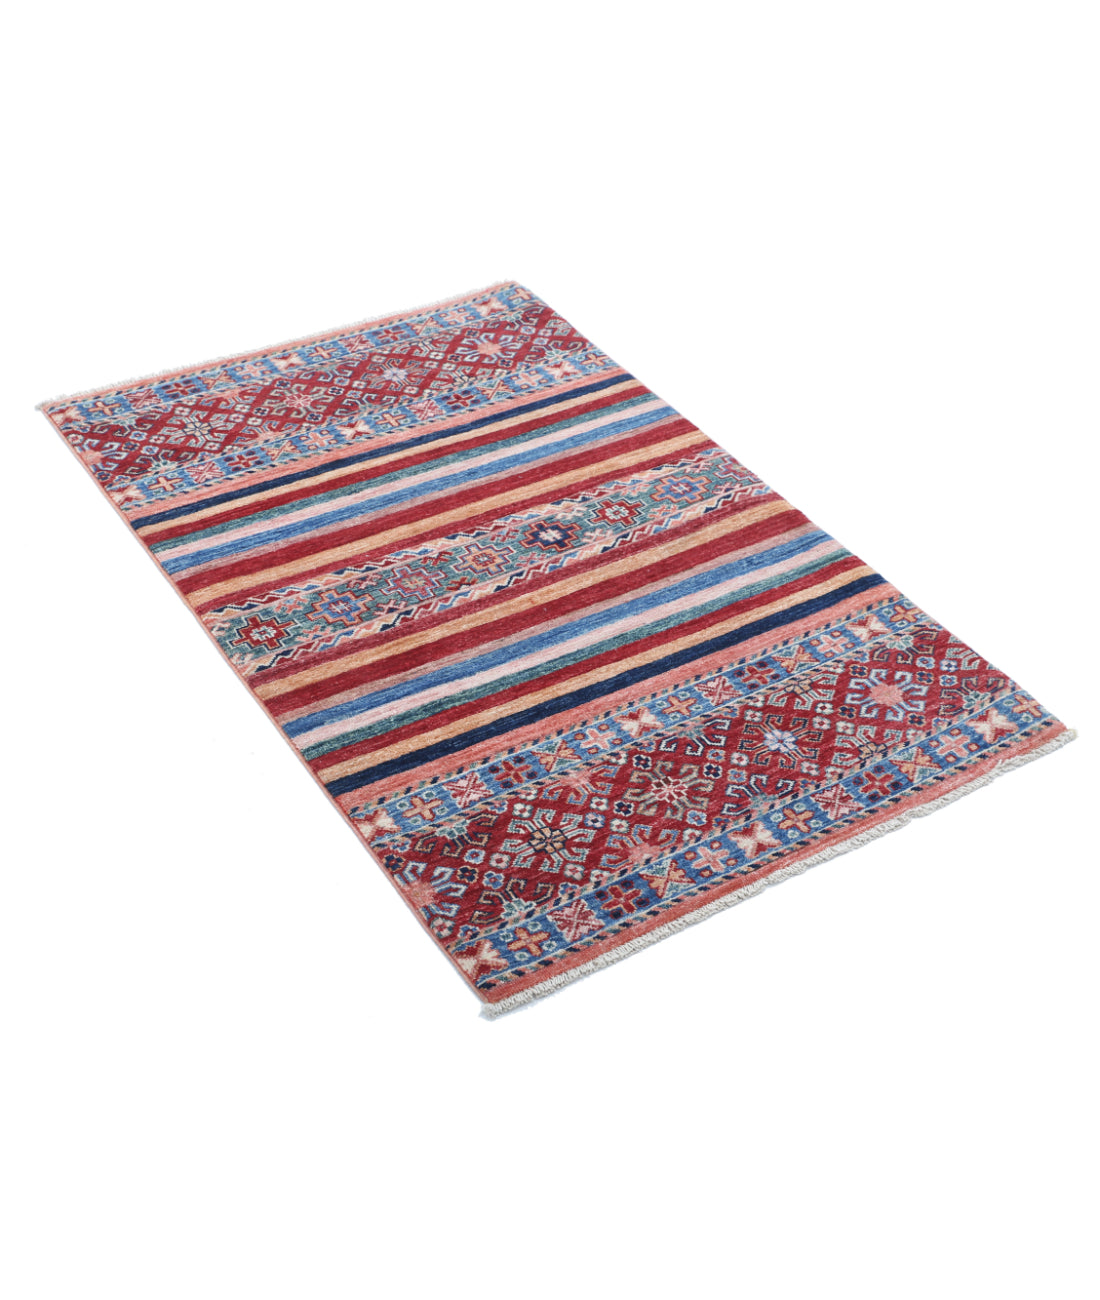 Hand Knotted Khurjeen Wool Rug - 2'9'' x 4'1'' 2'9'' x 4'1'' (83 X 123) / Multi / Multi